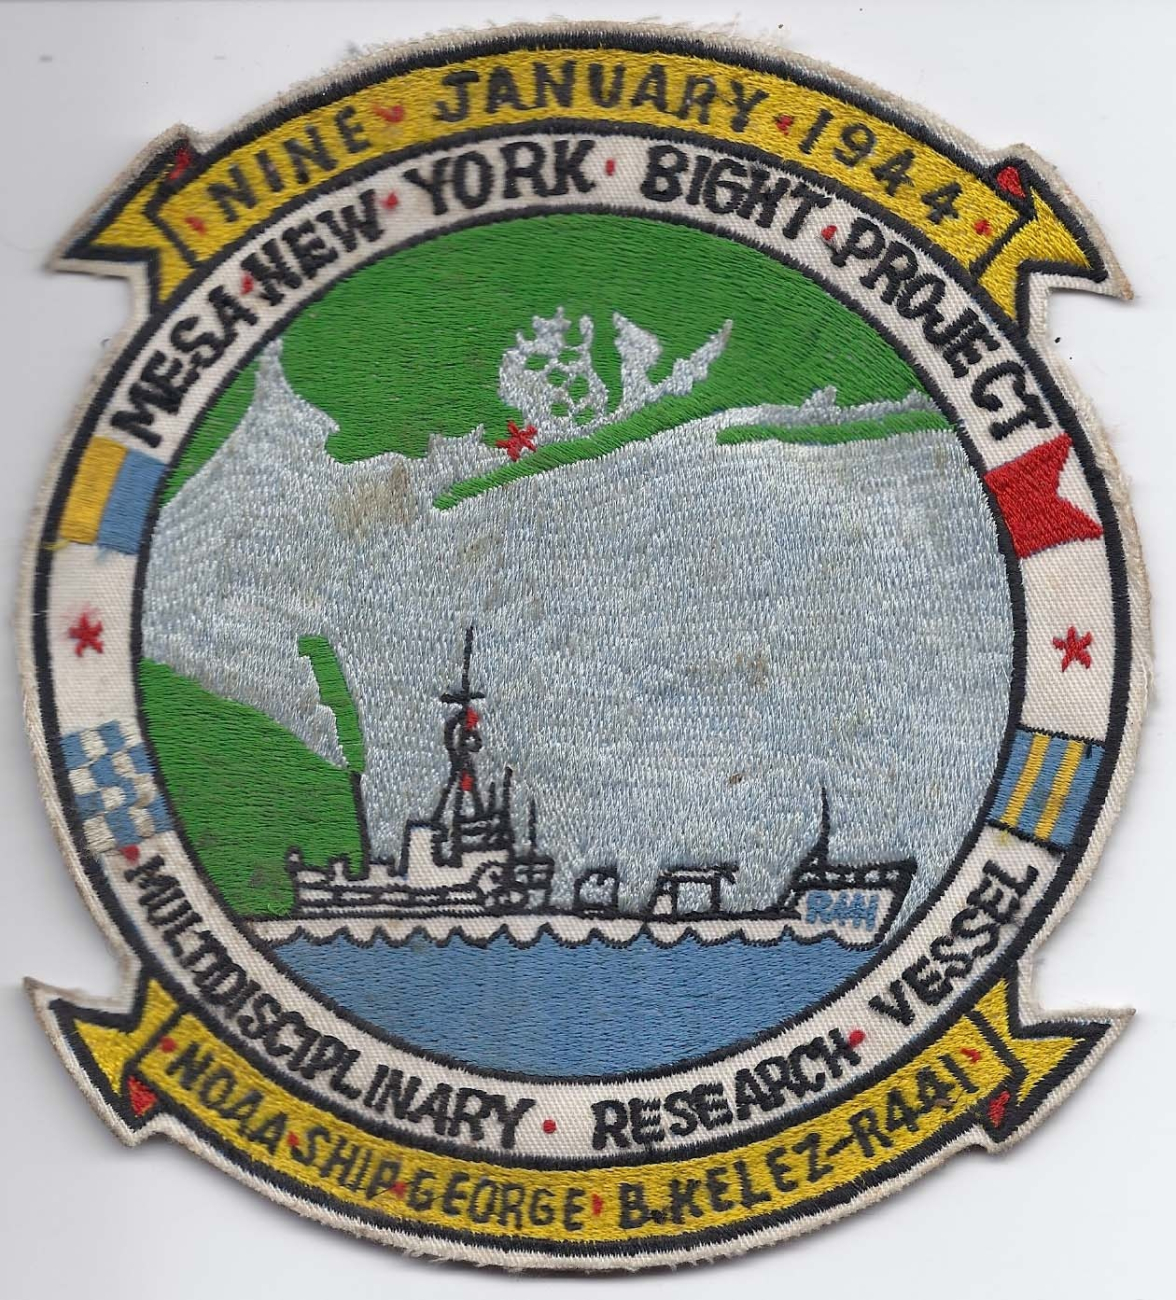 Patch commemorating the NOAA Ship GEORGE B